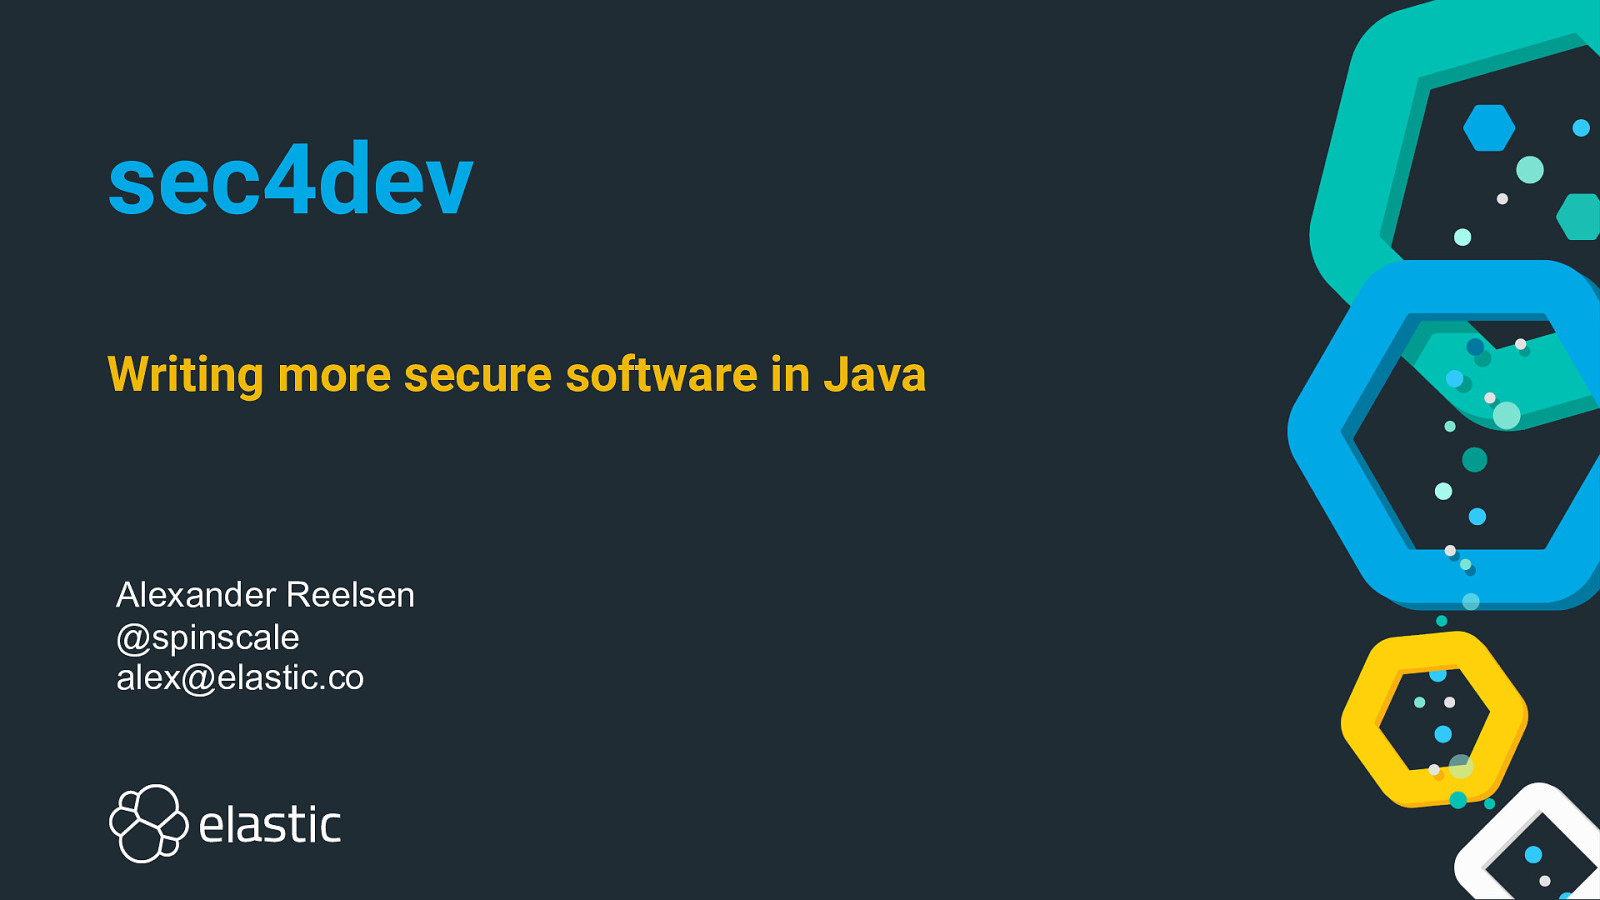 Writing more secure code in Java